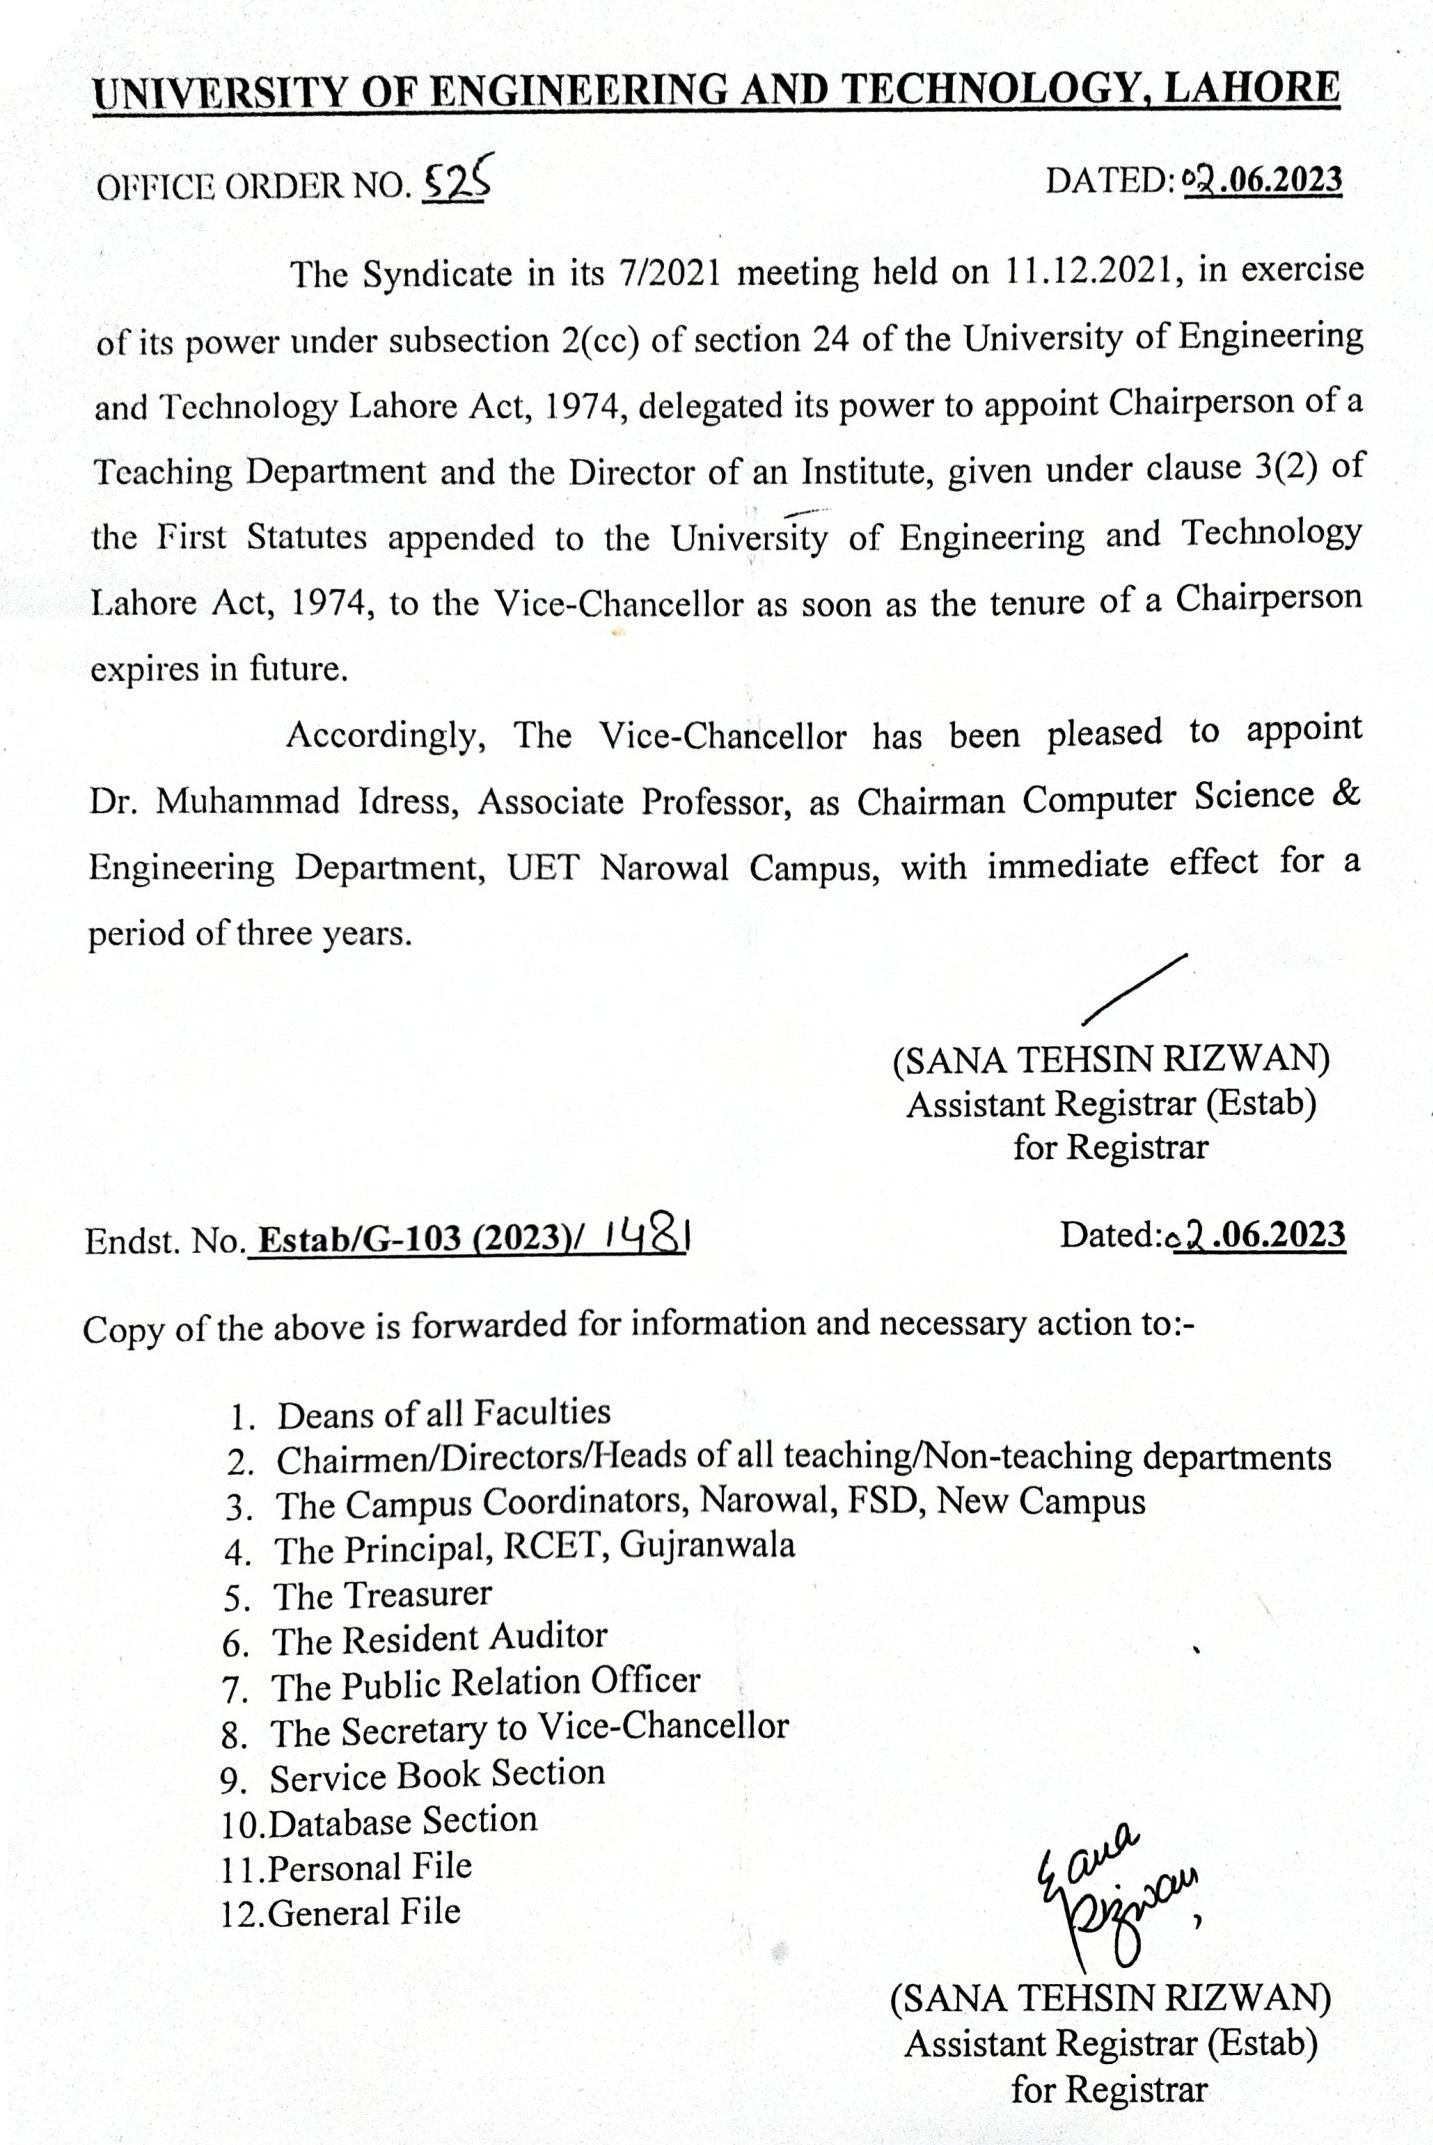 Appointment_of_Chairman_Computer_Science_UET_Narowal_